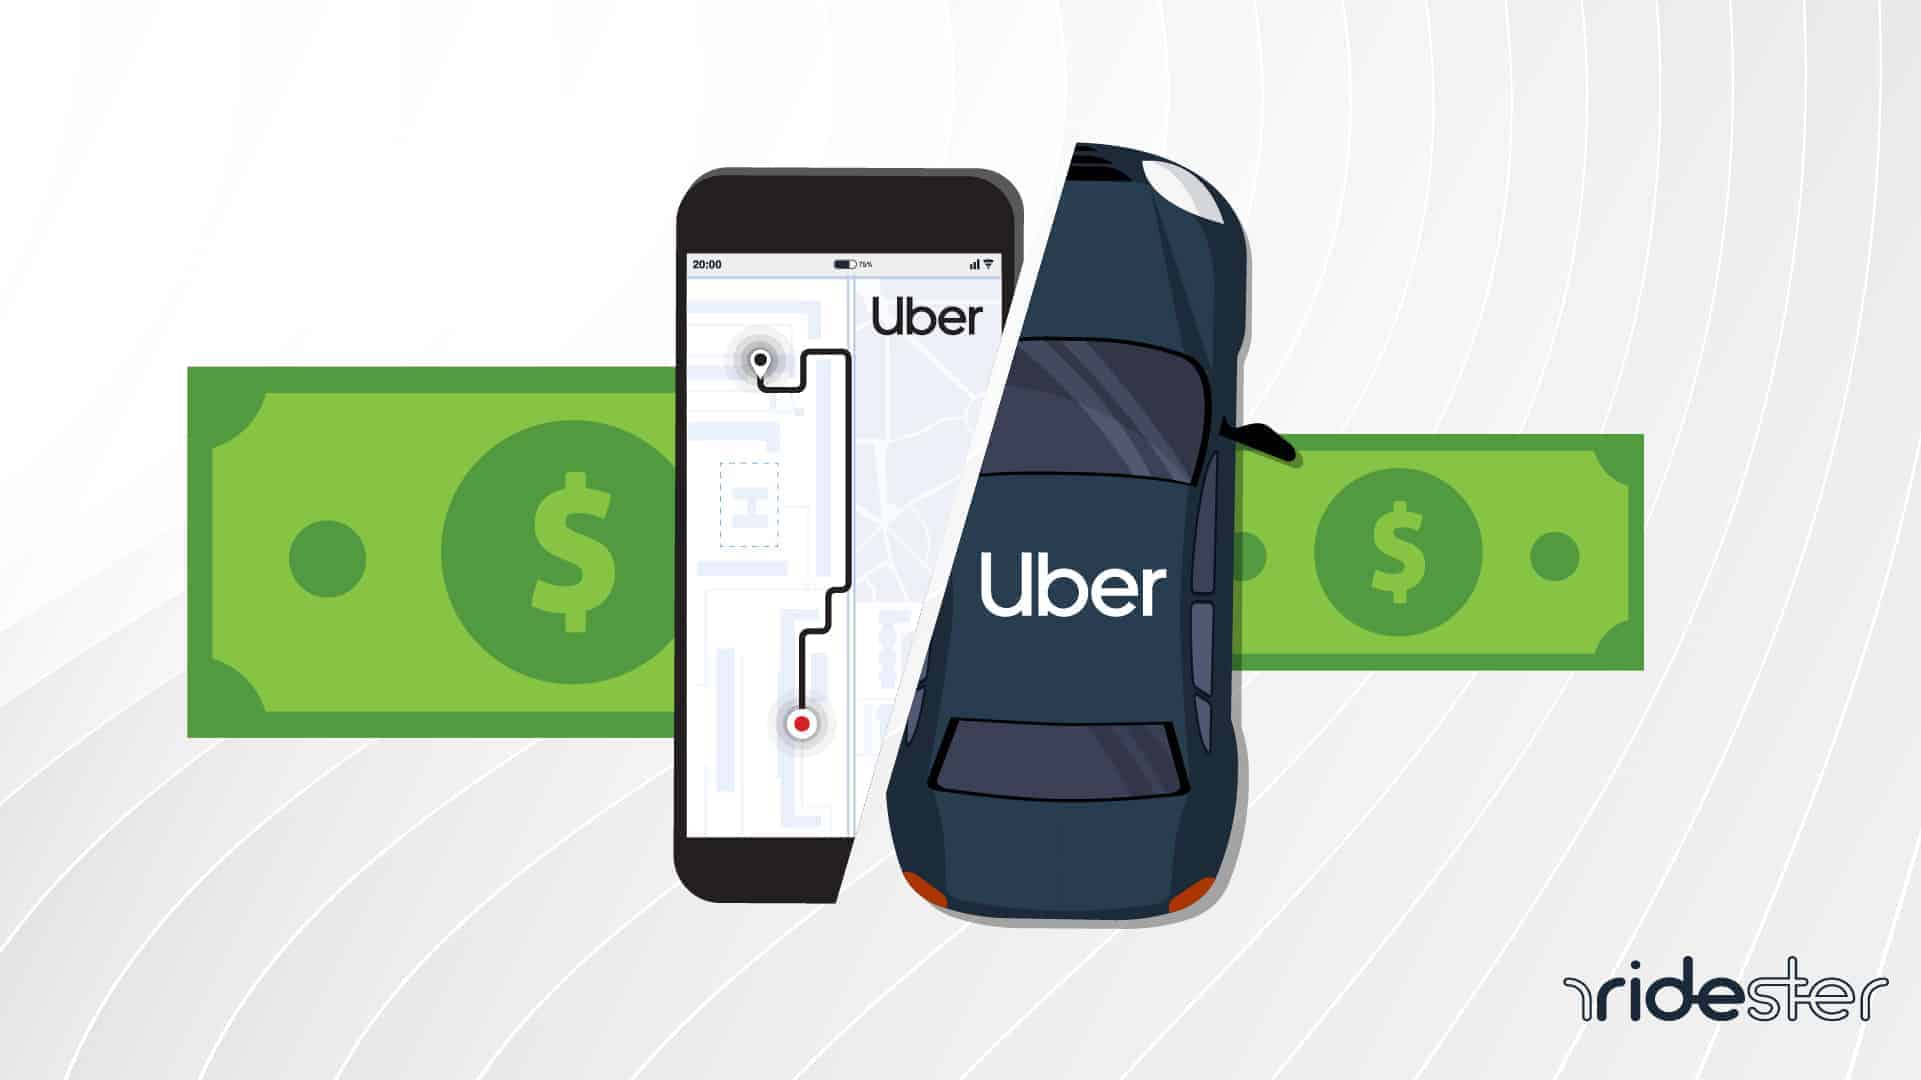 vector graphic showing an illustration of which rideshare service pays the most